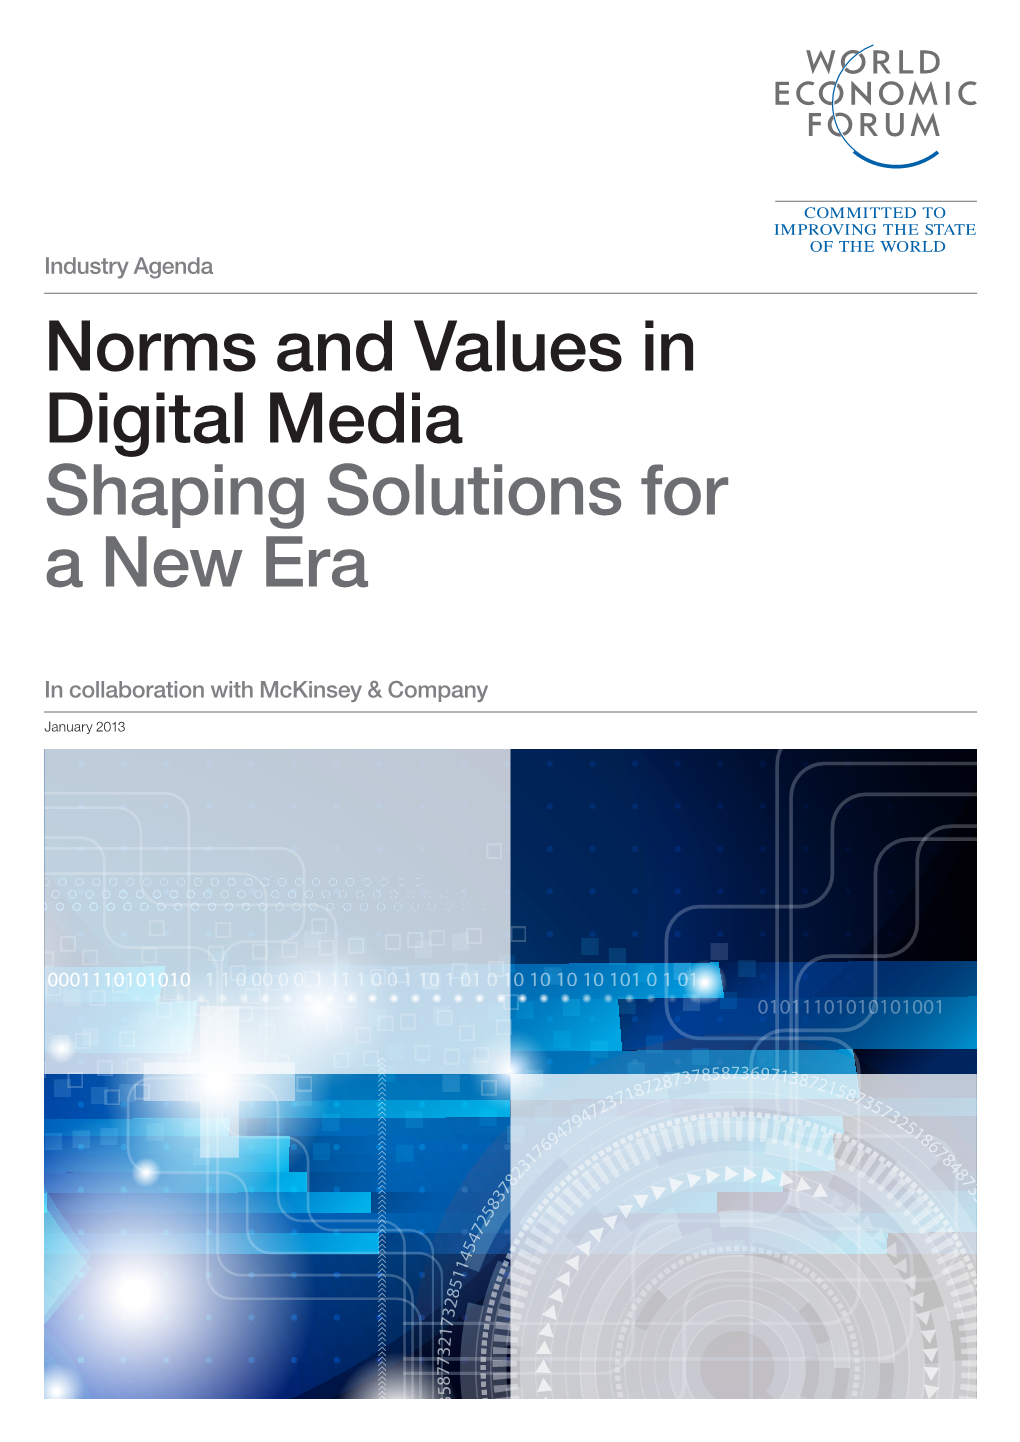 Norms and Values in Digital Media Shaping Solutions for a New Era